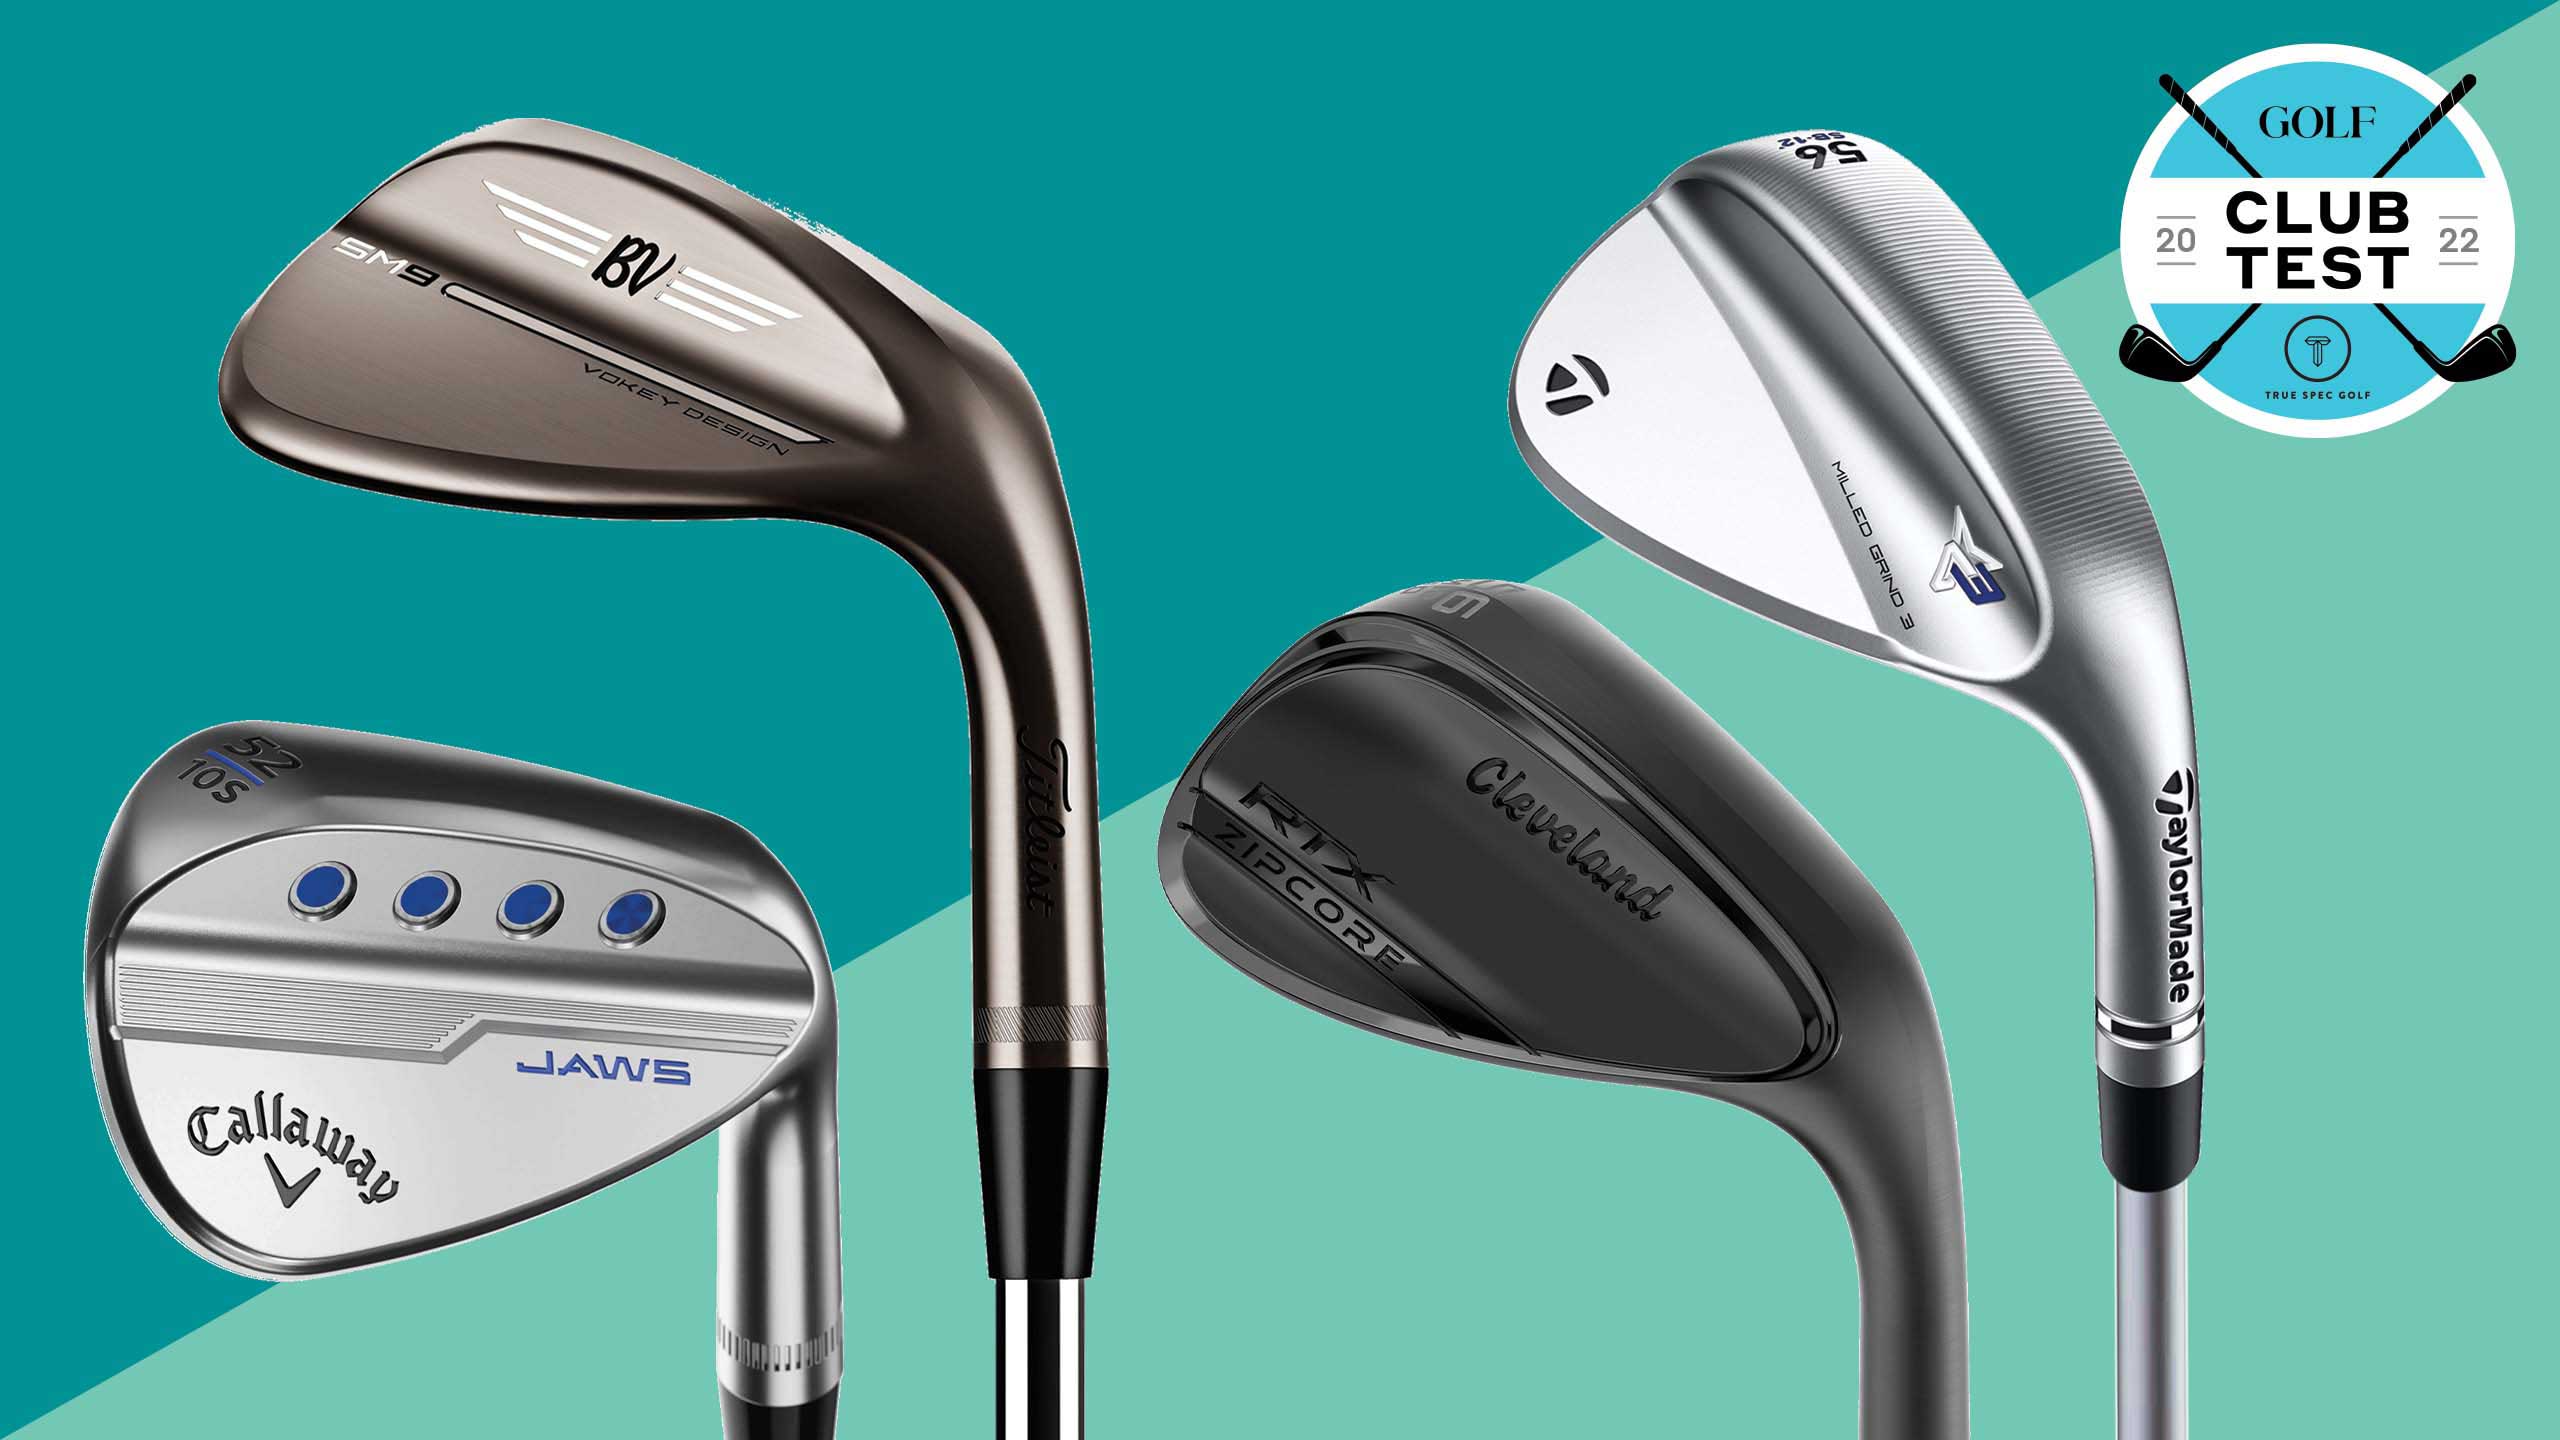 Best wedges 2022 20 new wedges tested, reviewed ClubTest